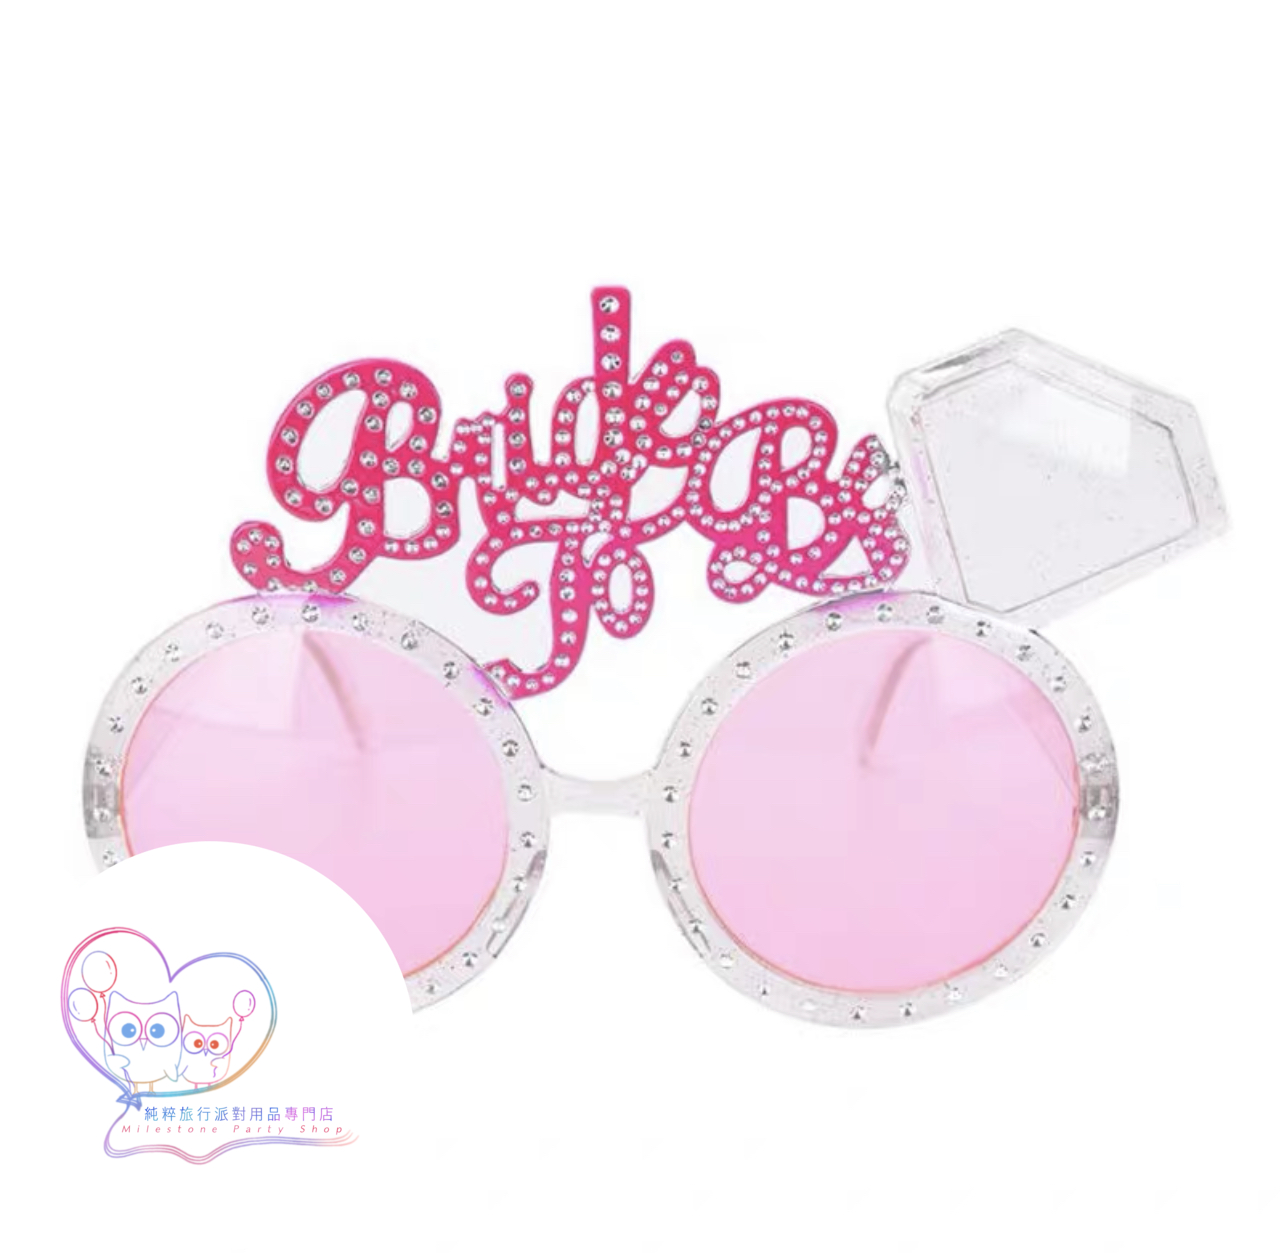 Bride to Be Glasses 婚前派對眼鏡 WSA4